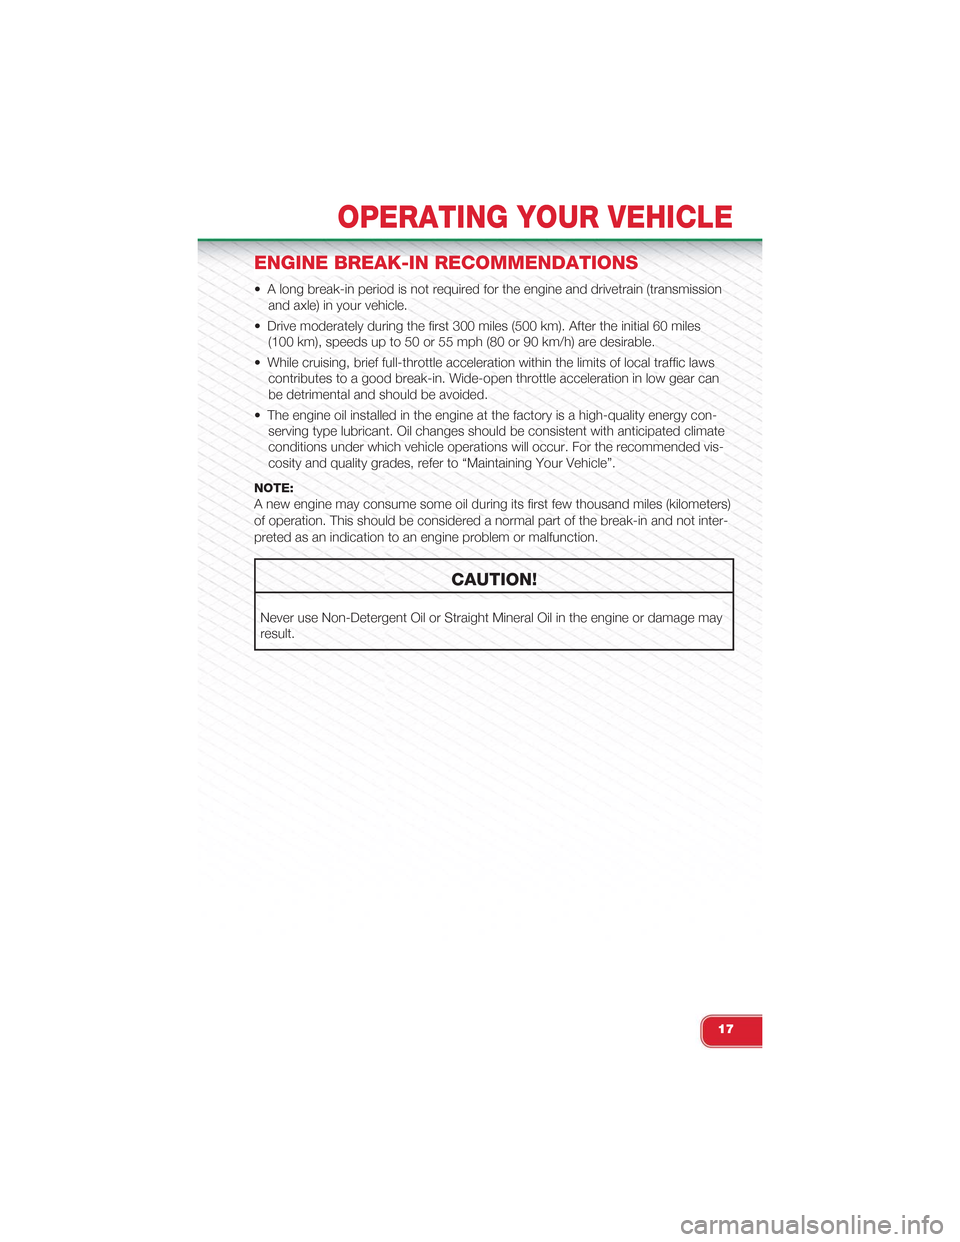 FIAT 500 ABARTH 2013 2.G User Guide ENGINE BREAK-IN RECOMMENDATIONS
• A long break-in period is not required for the engine and drivetrain (transmission
and axle) in your vehicle.
• Drive moderately during the first 300 miles (500 k